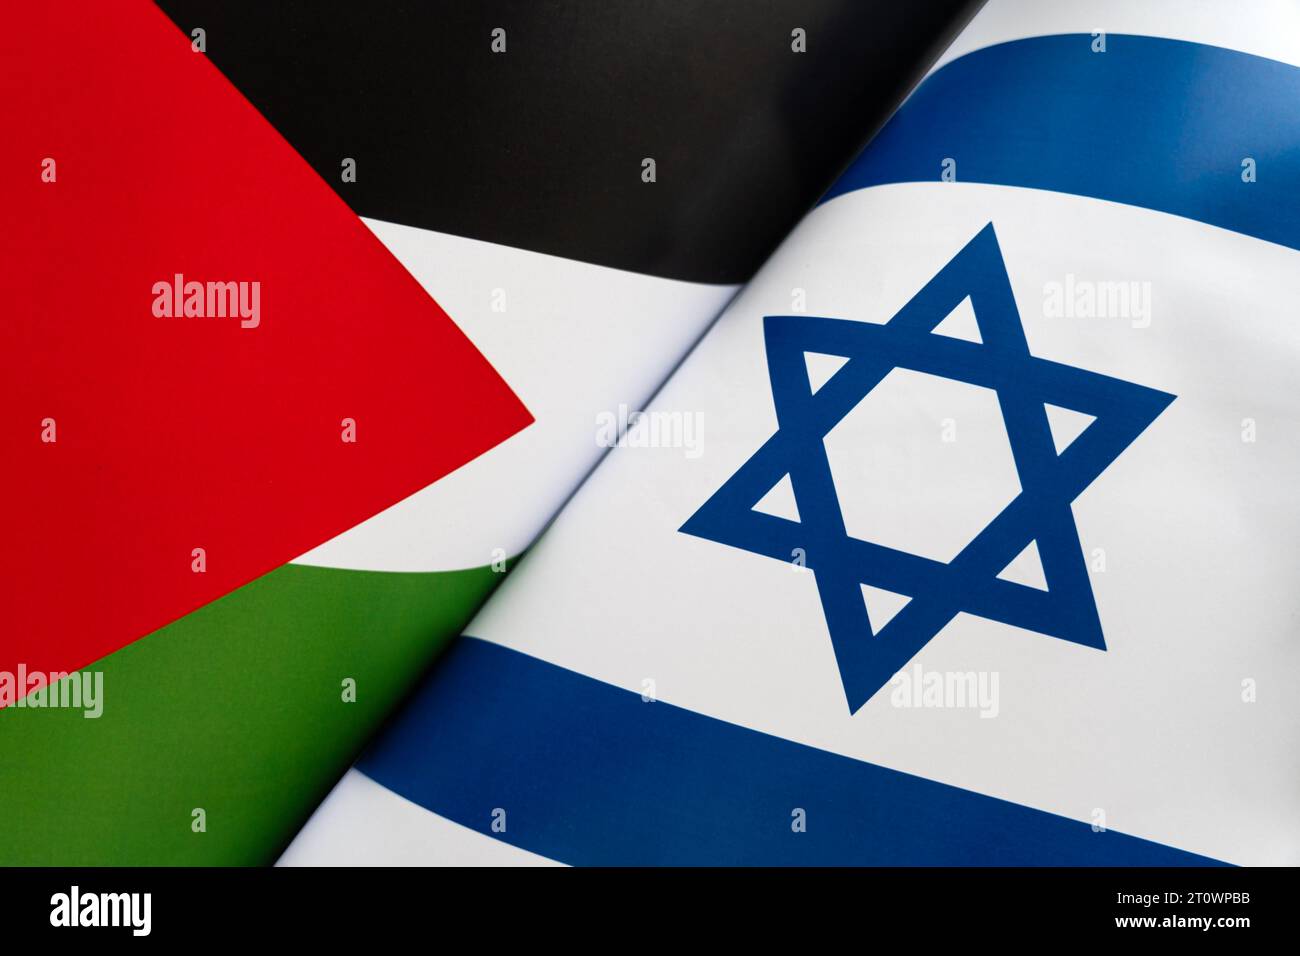 Background of the flags of the Israel and palestine. The concept of interaction or counteraction between the two countries. International relations. p Stock Photo